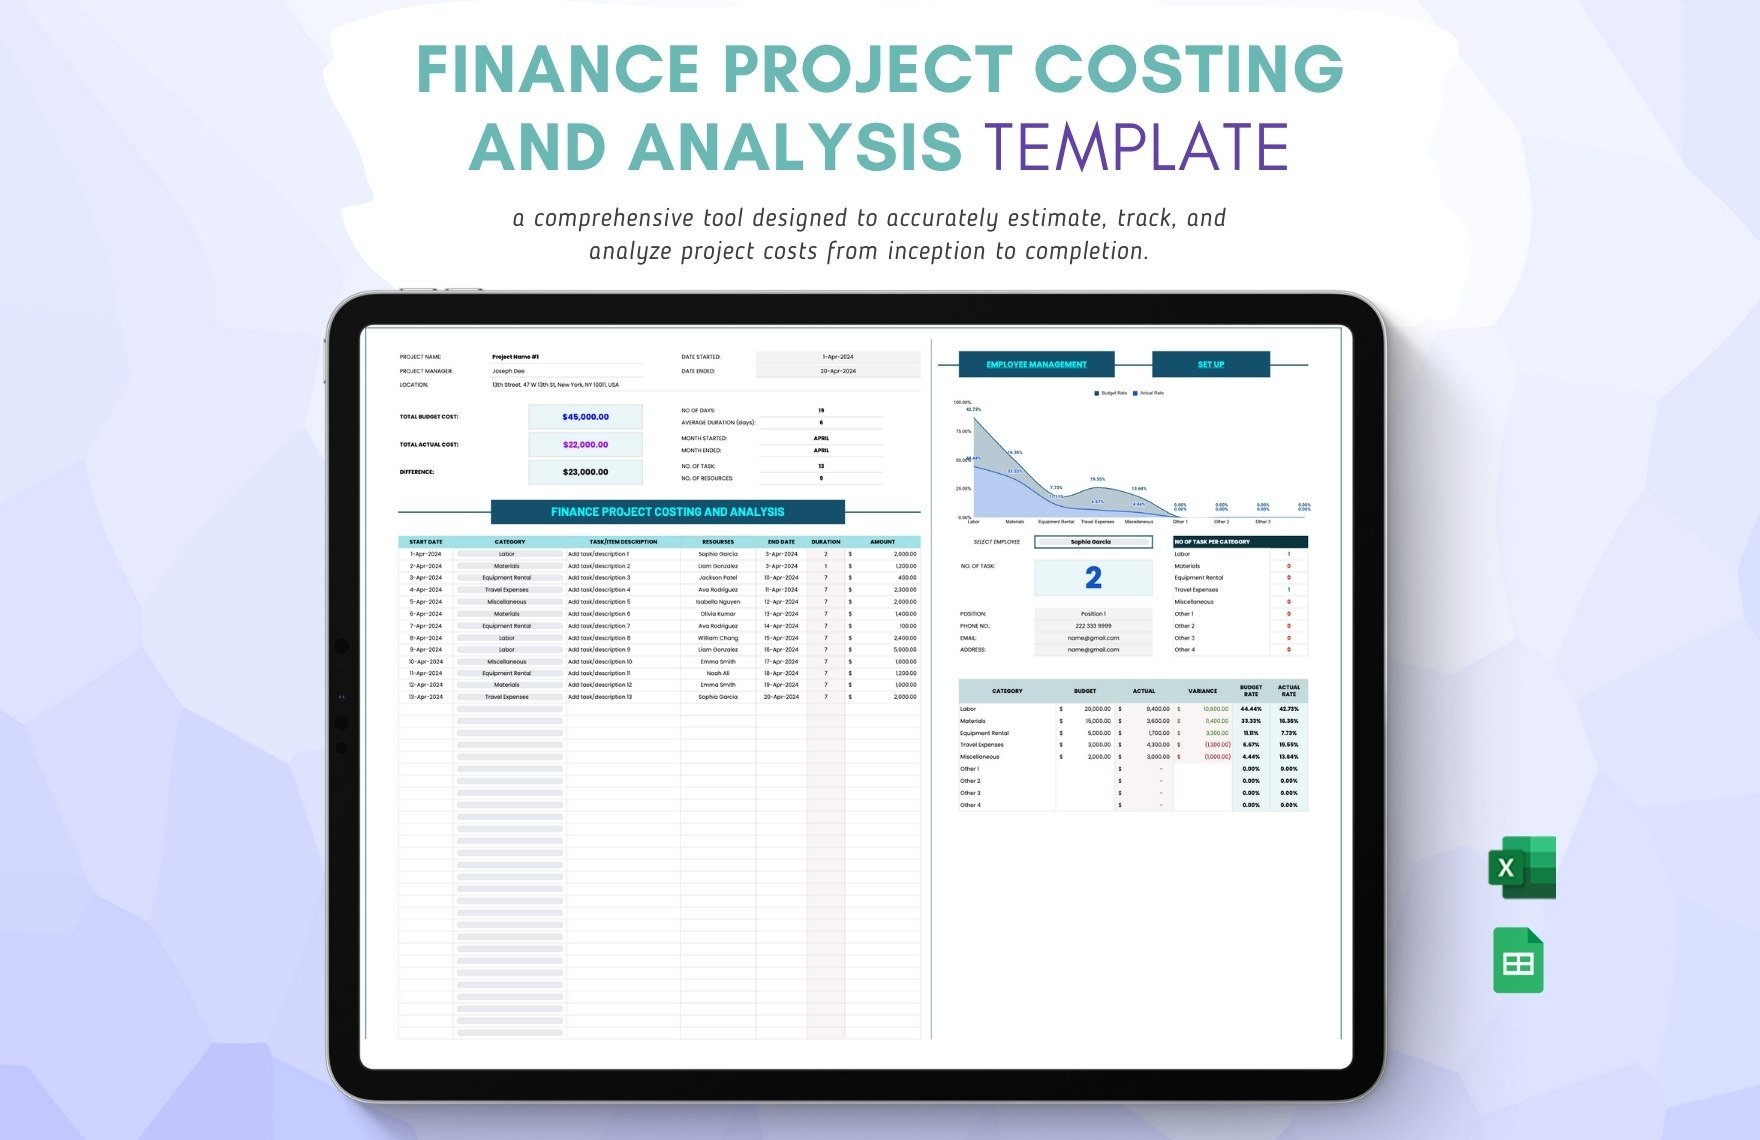 Finance Project Costing and Analysis Template